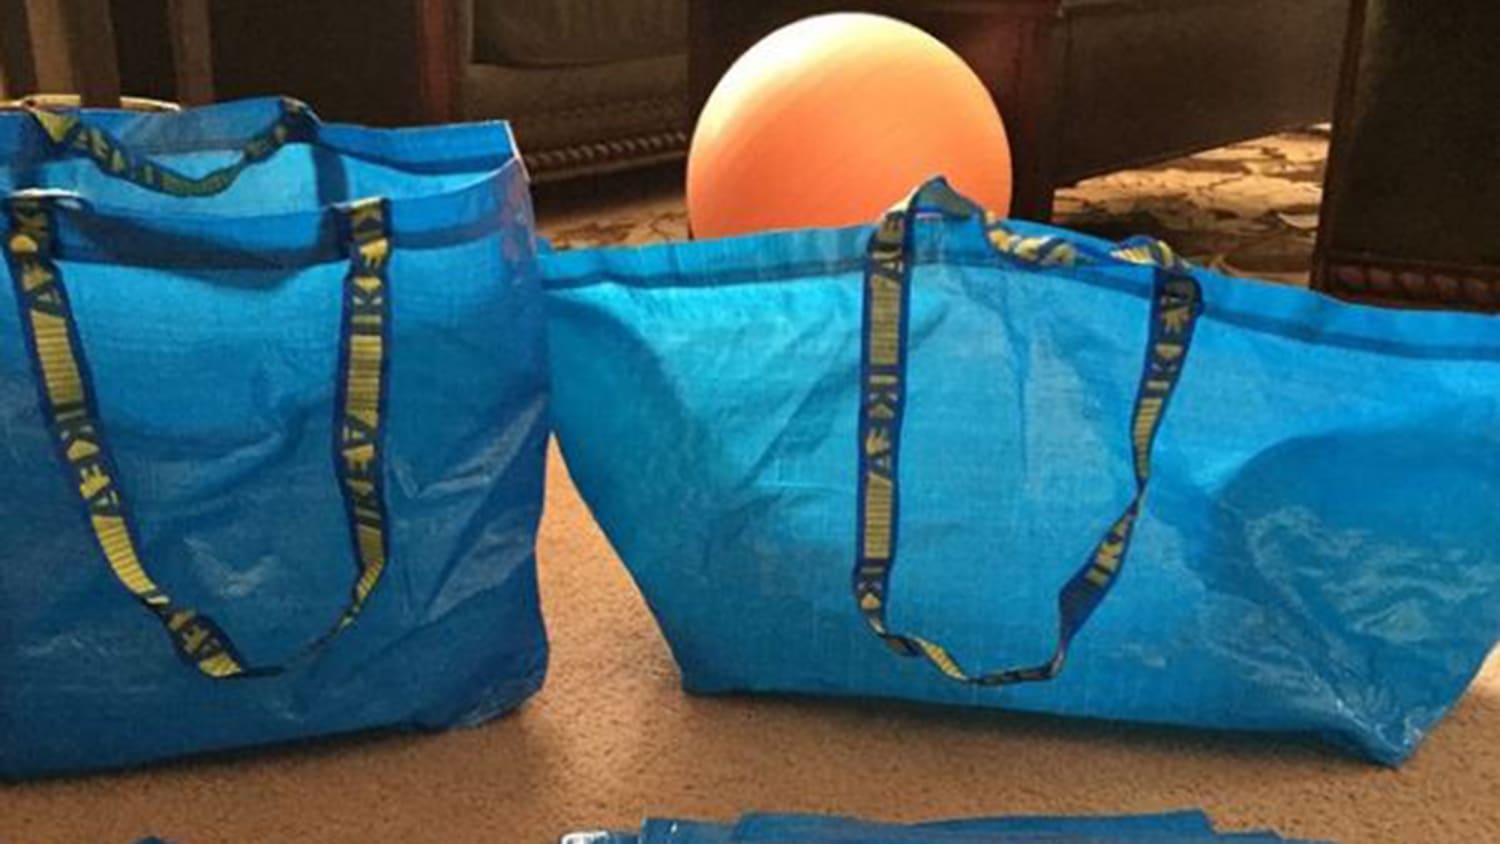 Ikea Bag Photos and Images & Pictures